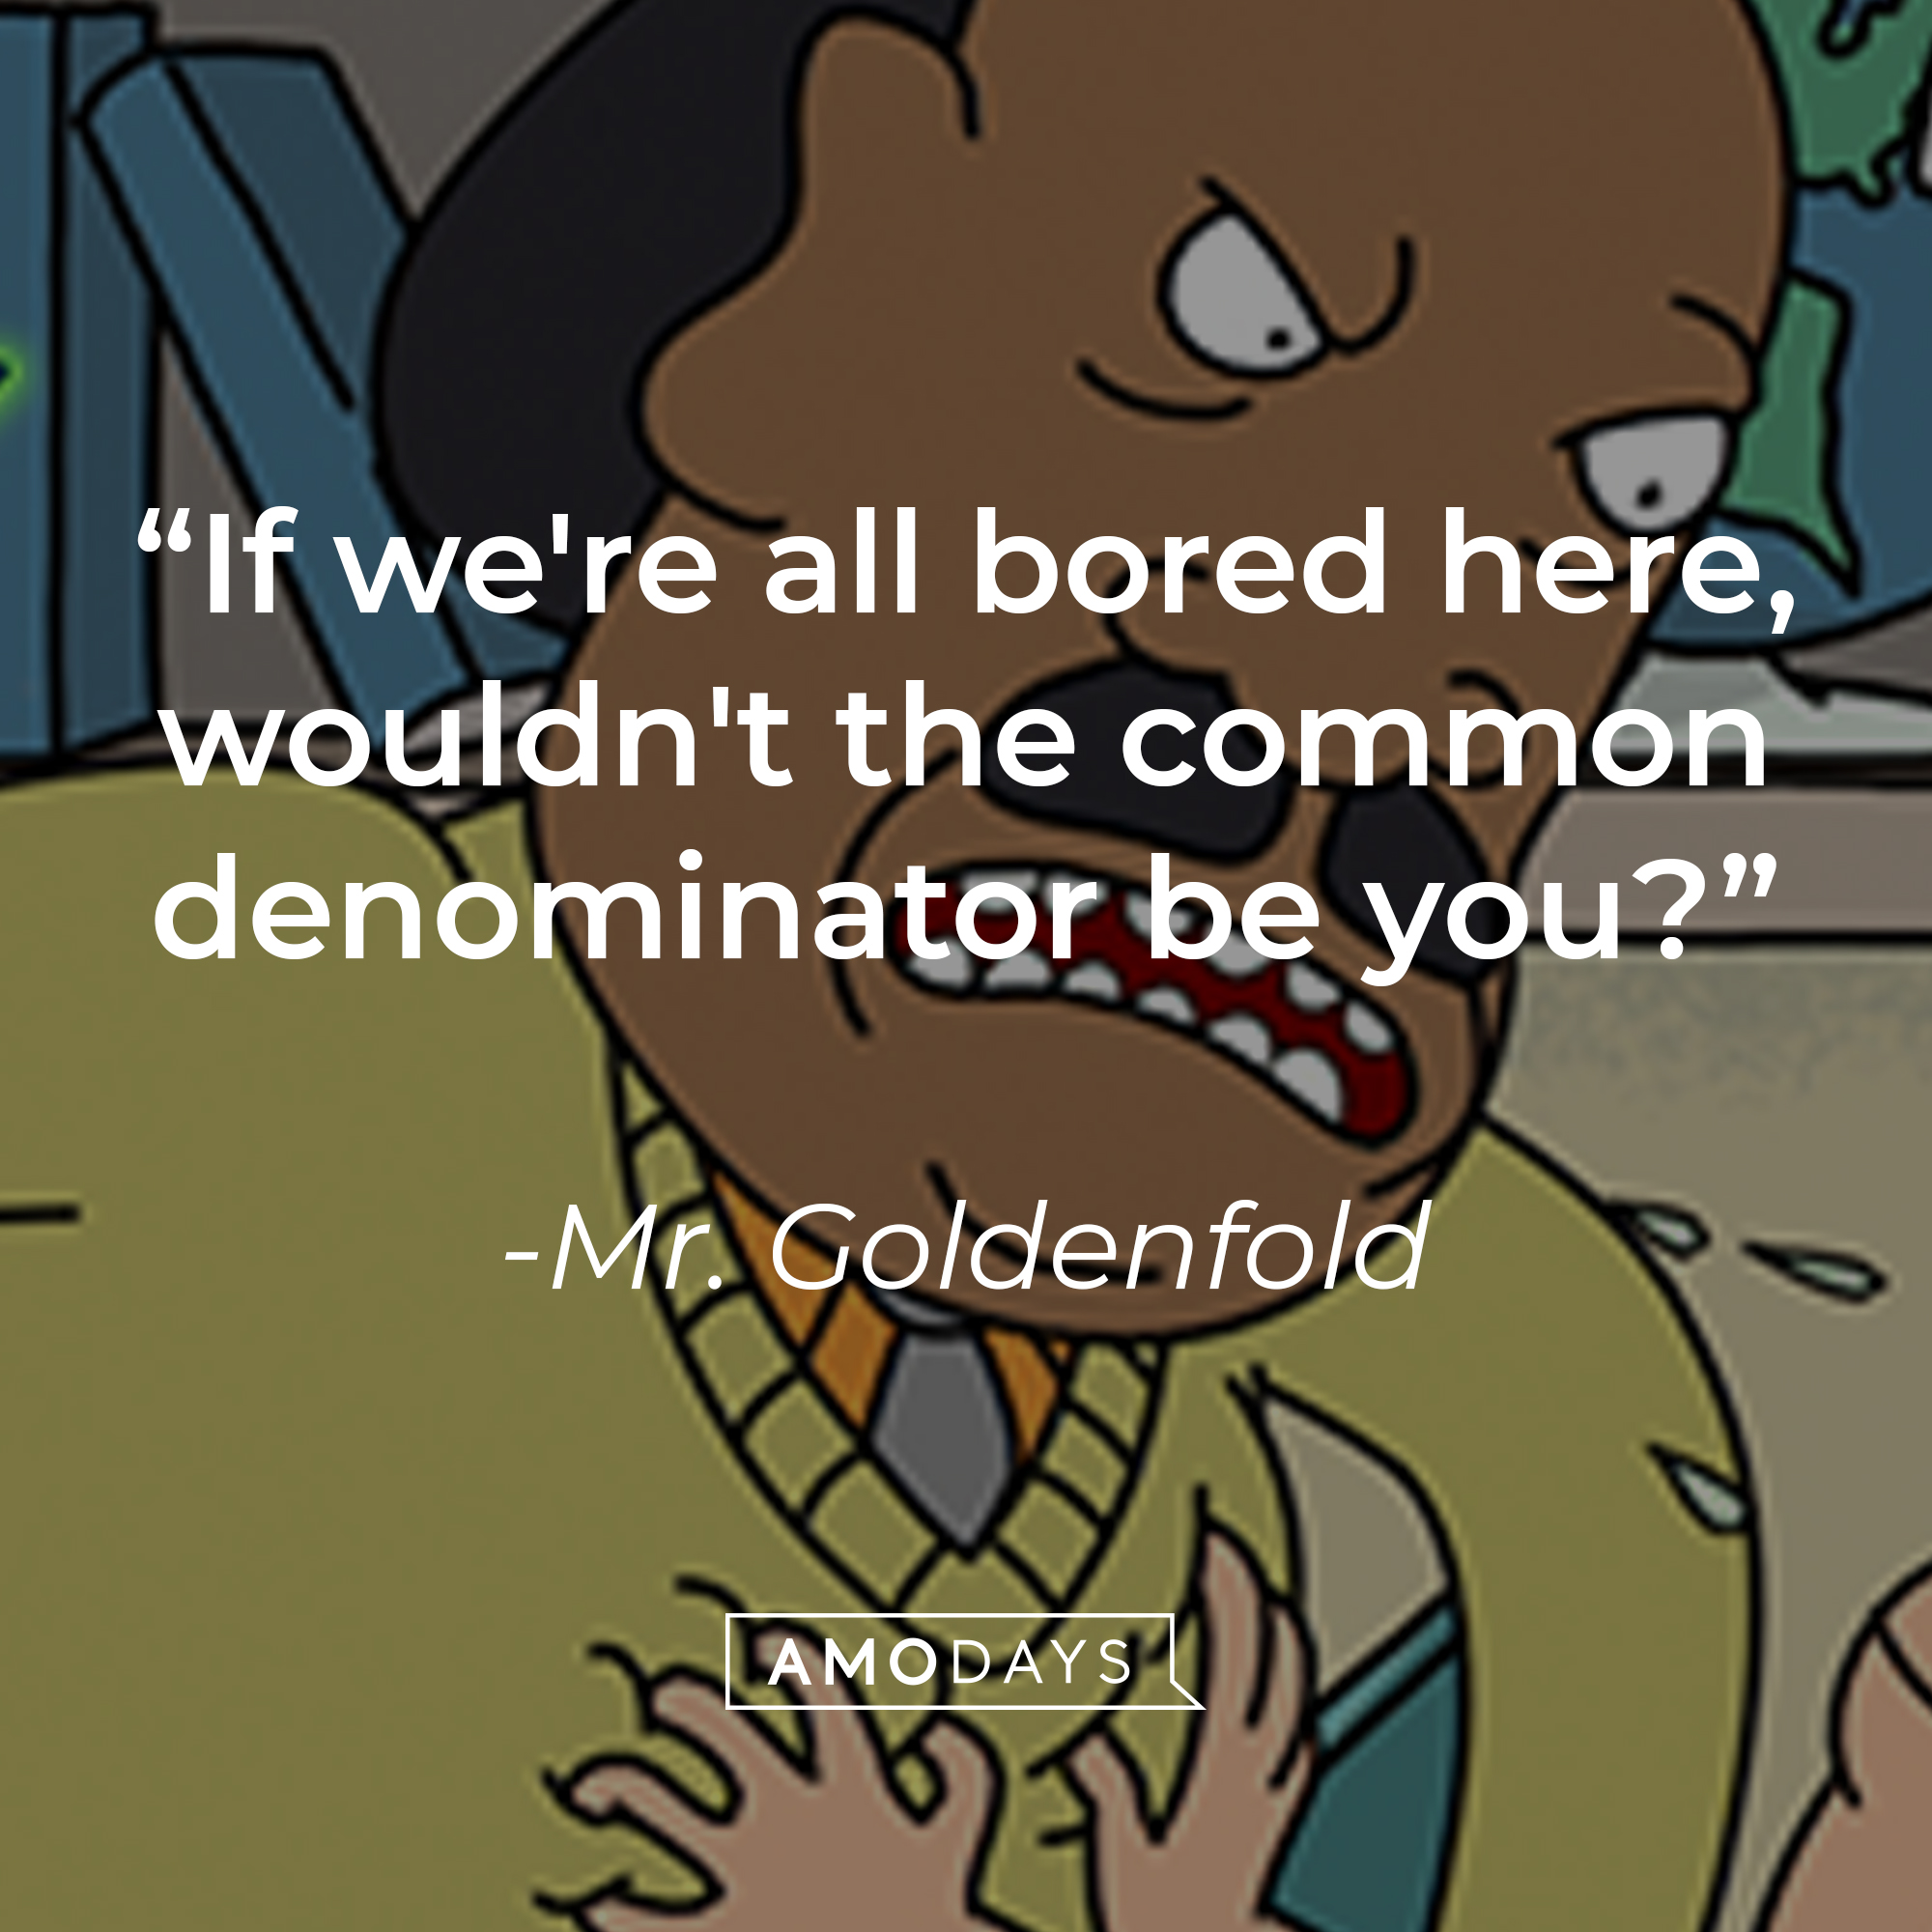 An image of Mr. Goldenfold, with his quote: "If we're all bored here, wouldn't the common denominator be you?" | Source: Facebook.com/RickandMorty